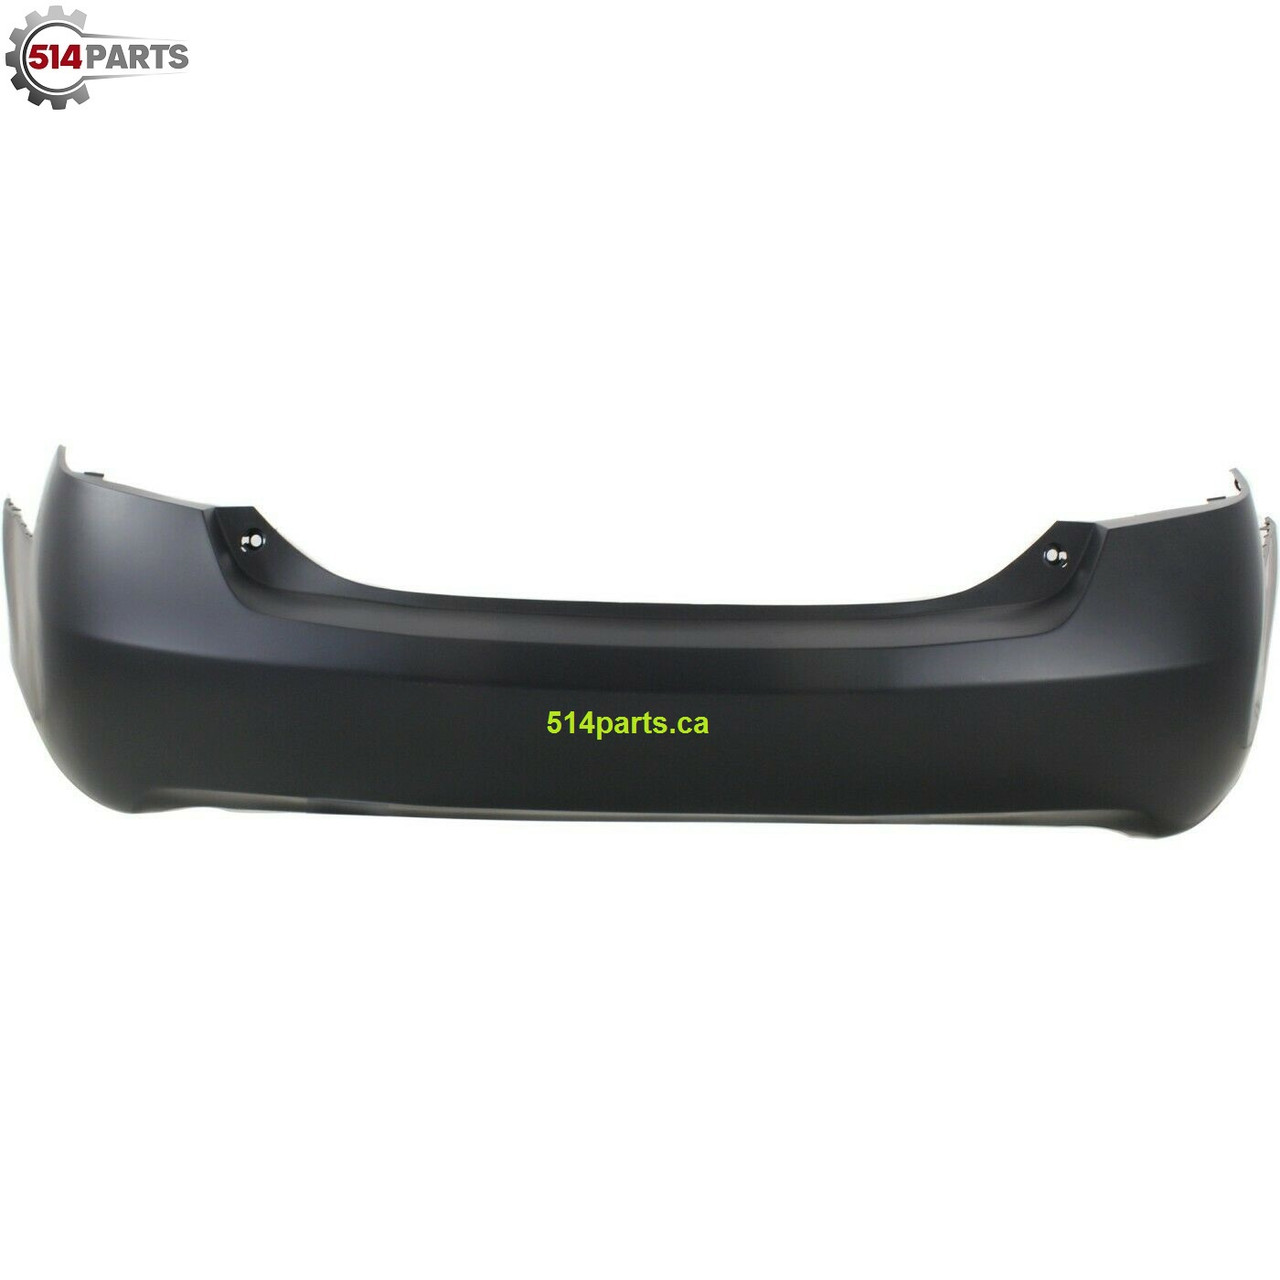 2007 - 2011 TOYOTA CAMRY 6 CYL LE/XLE/BASE REAR BUMPER COVER - PARE-CHOC ARRIERE